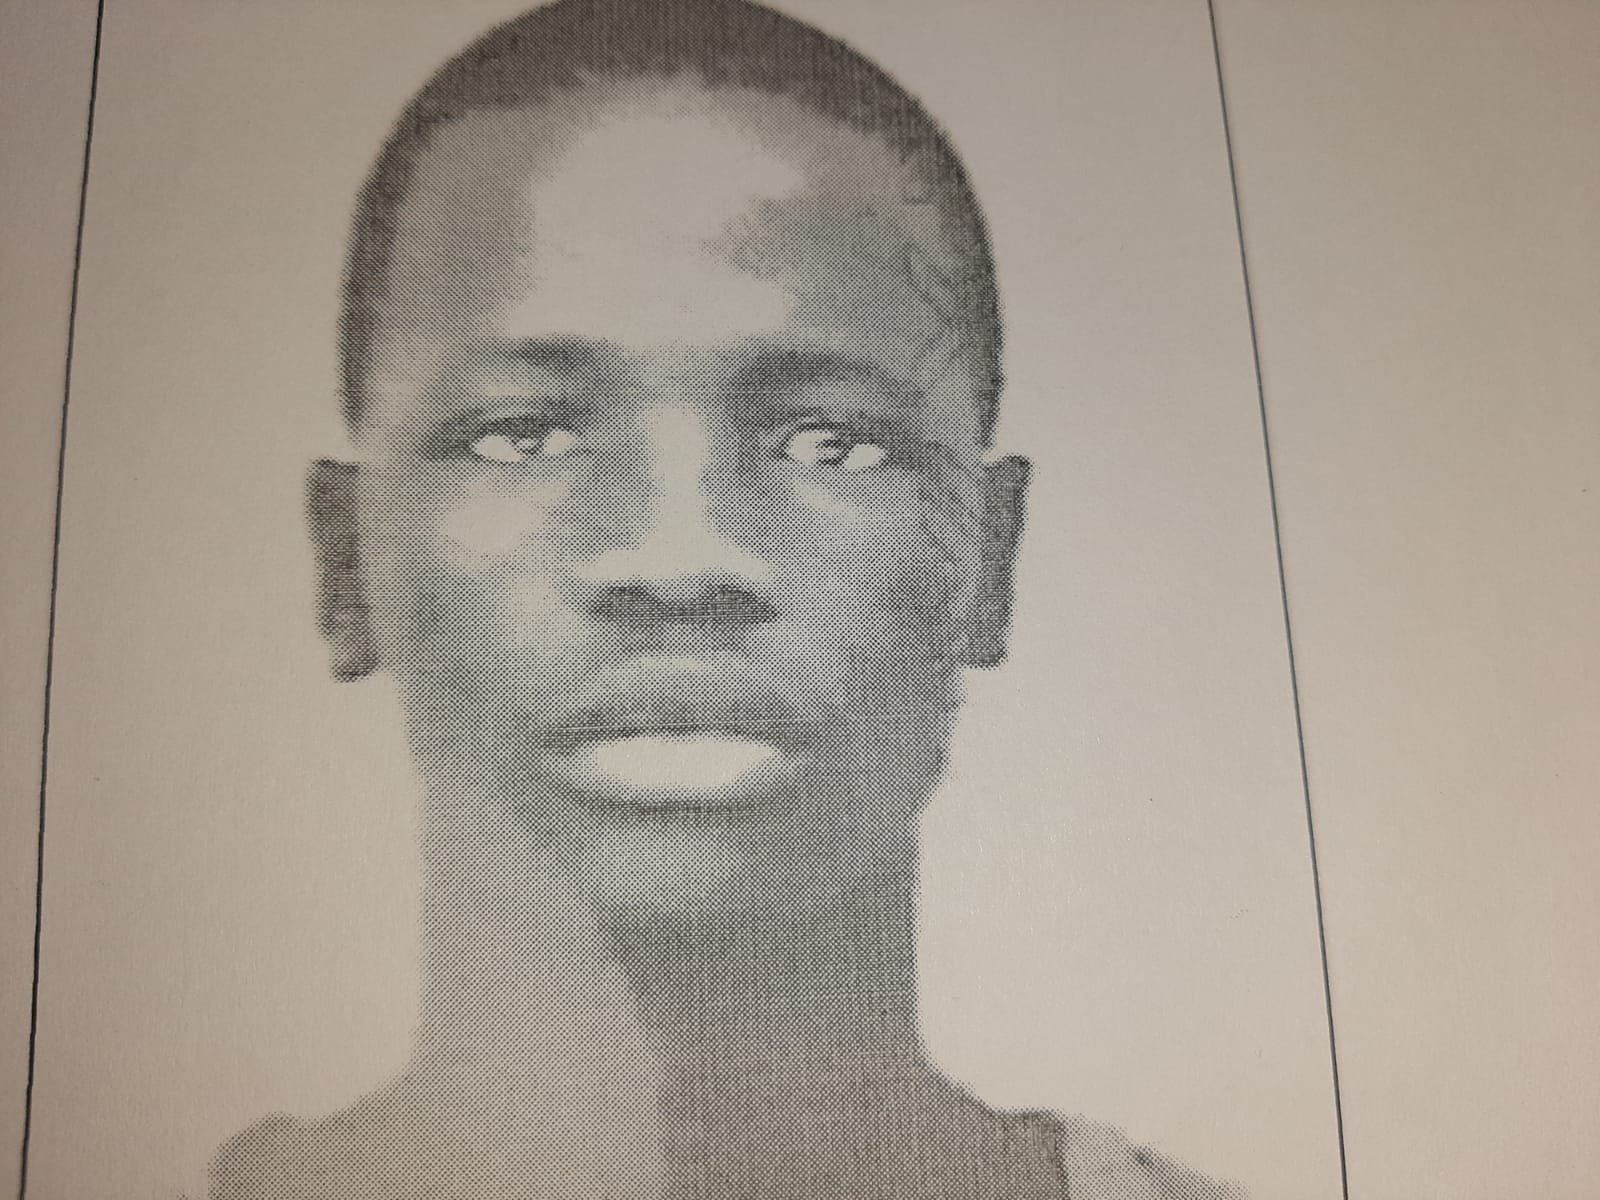 Itsoseng police request community assistance in locating missing man